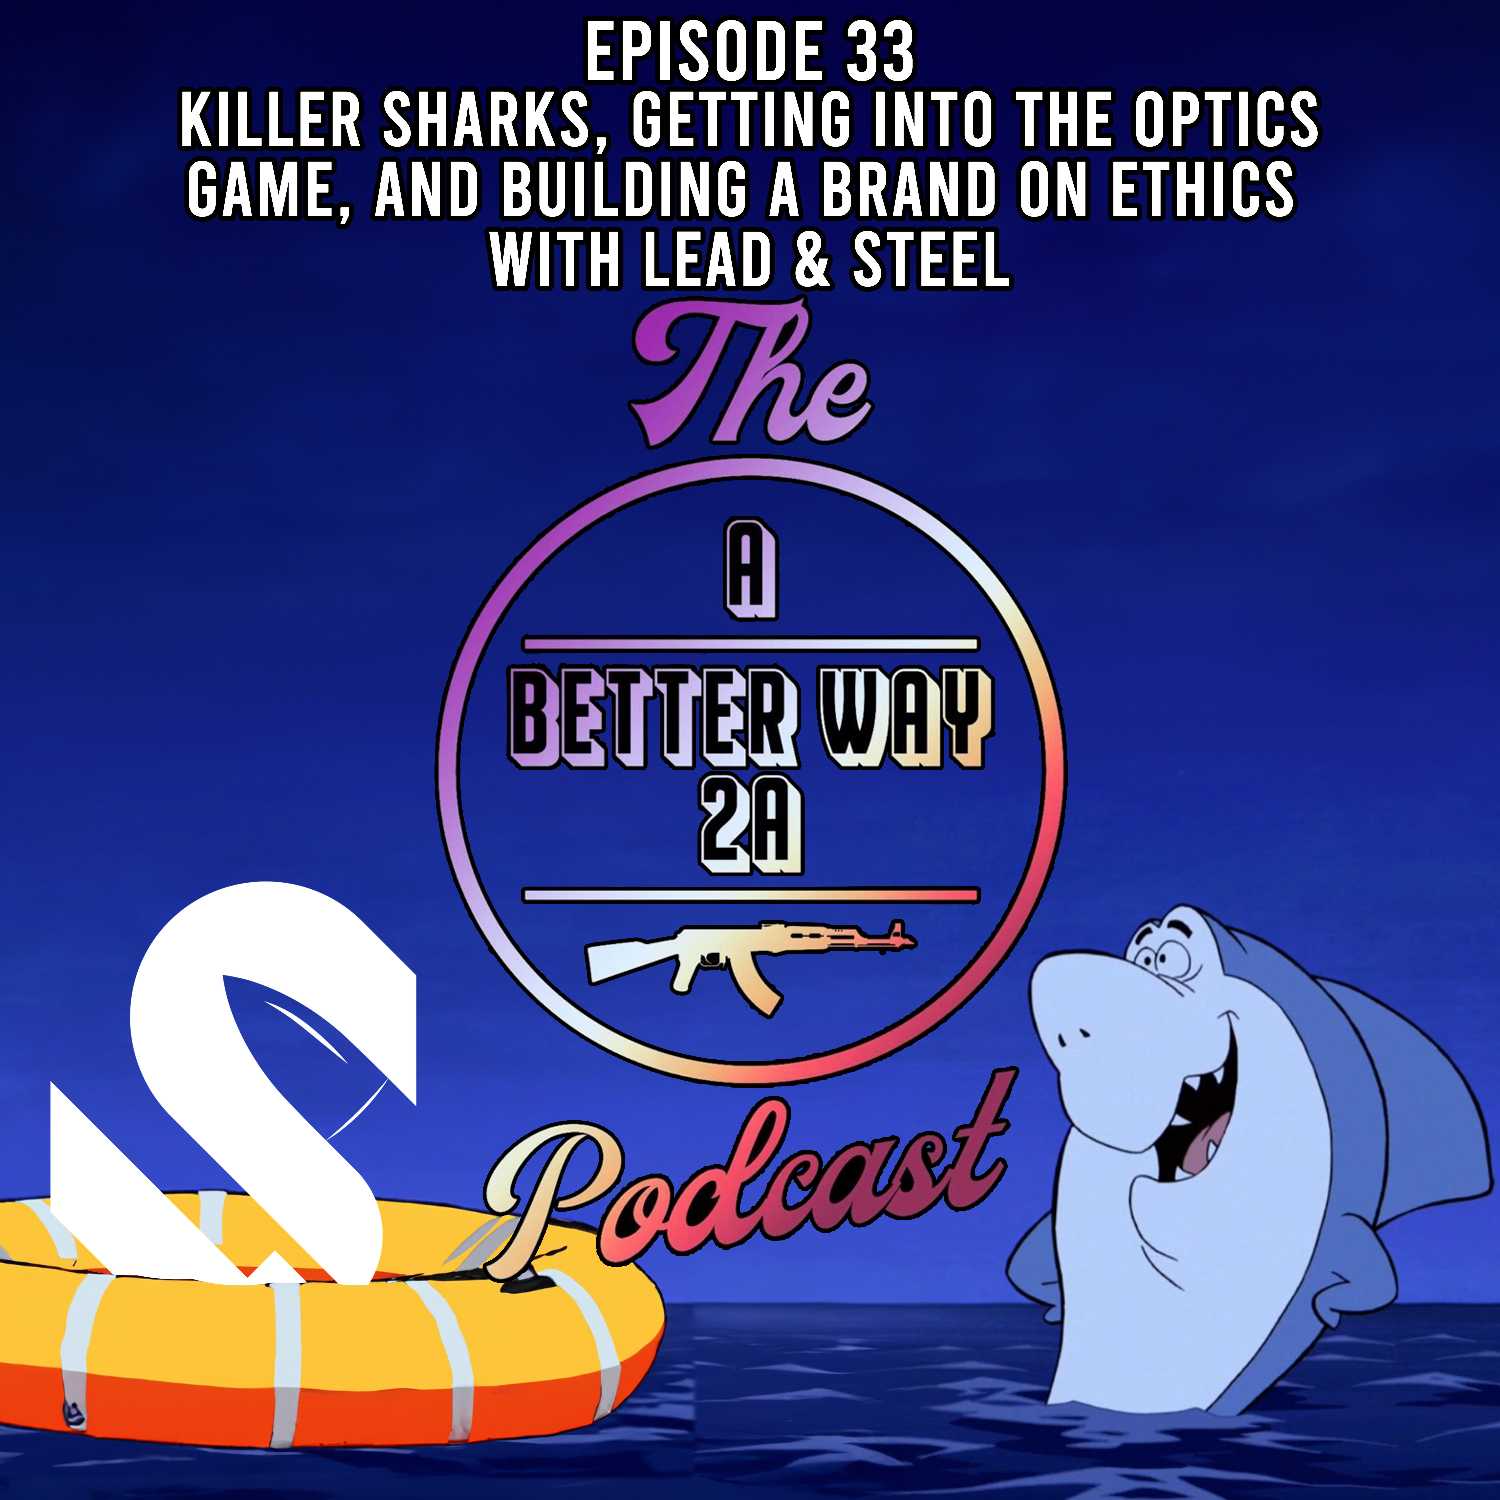 Episode 33 - Killer Sharks, Getting Into The Optics Game, and Building a Brand on Ethics with Lead & Steel